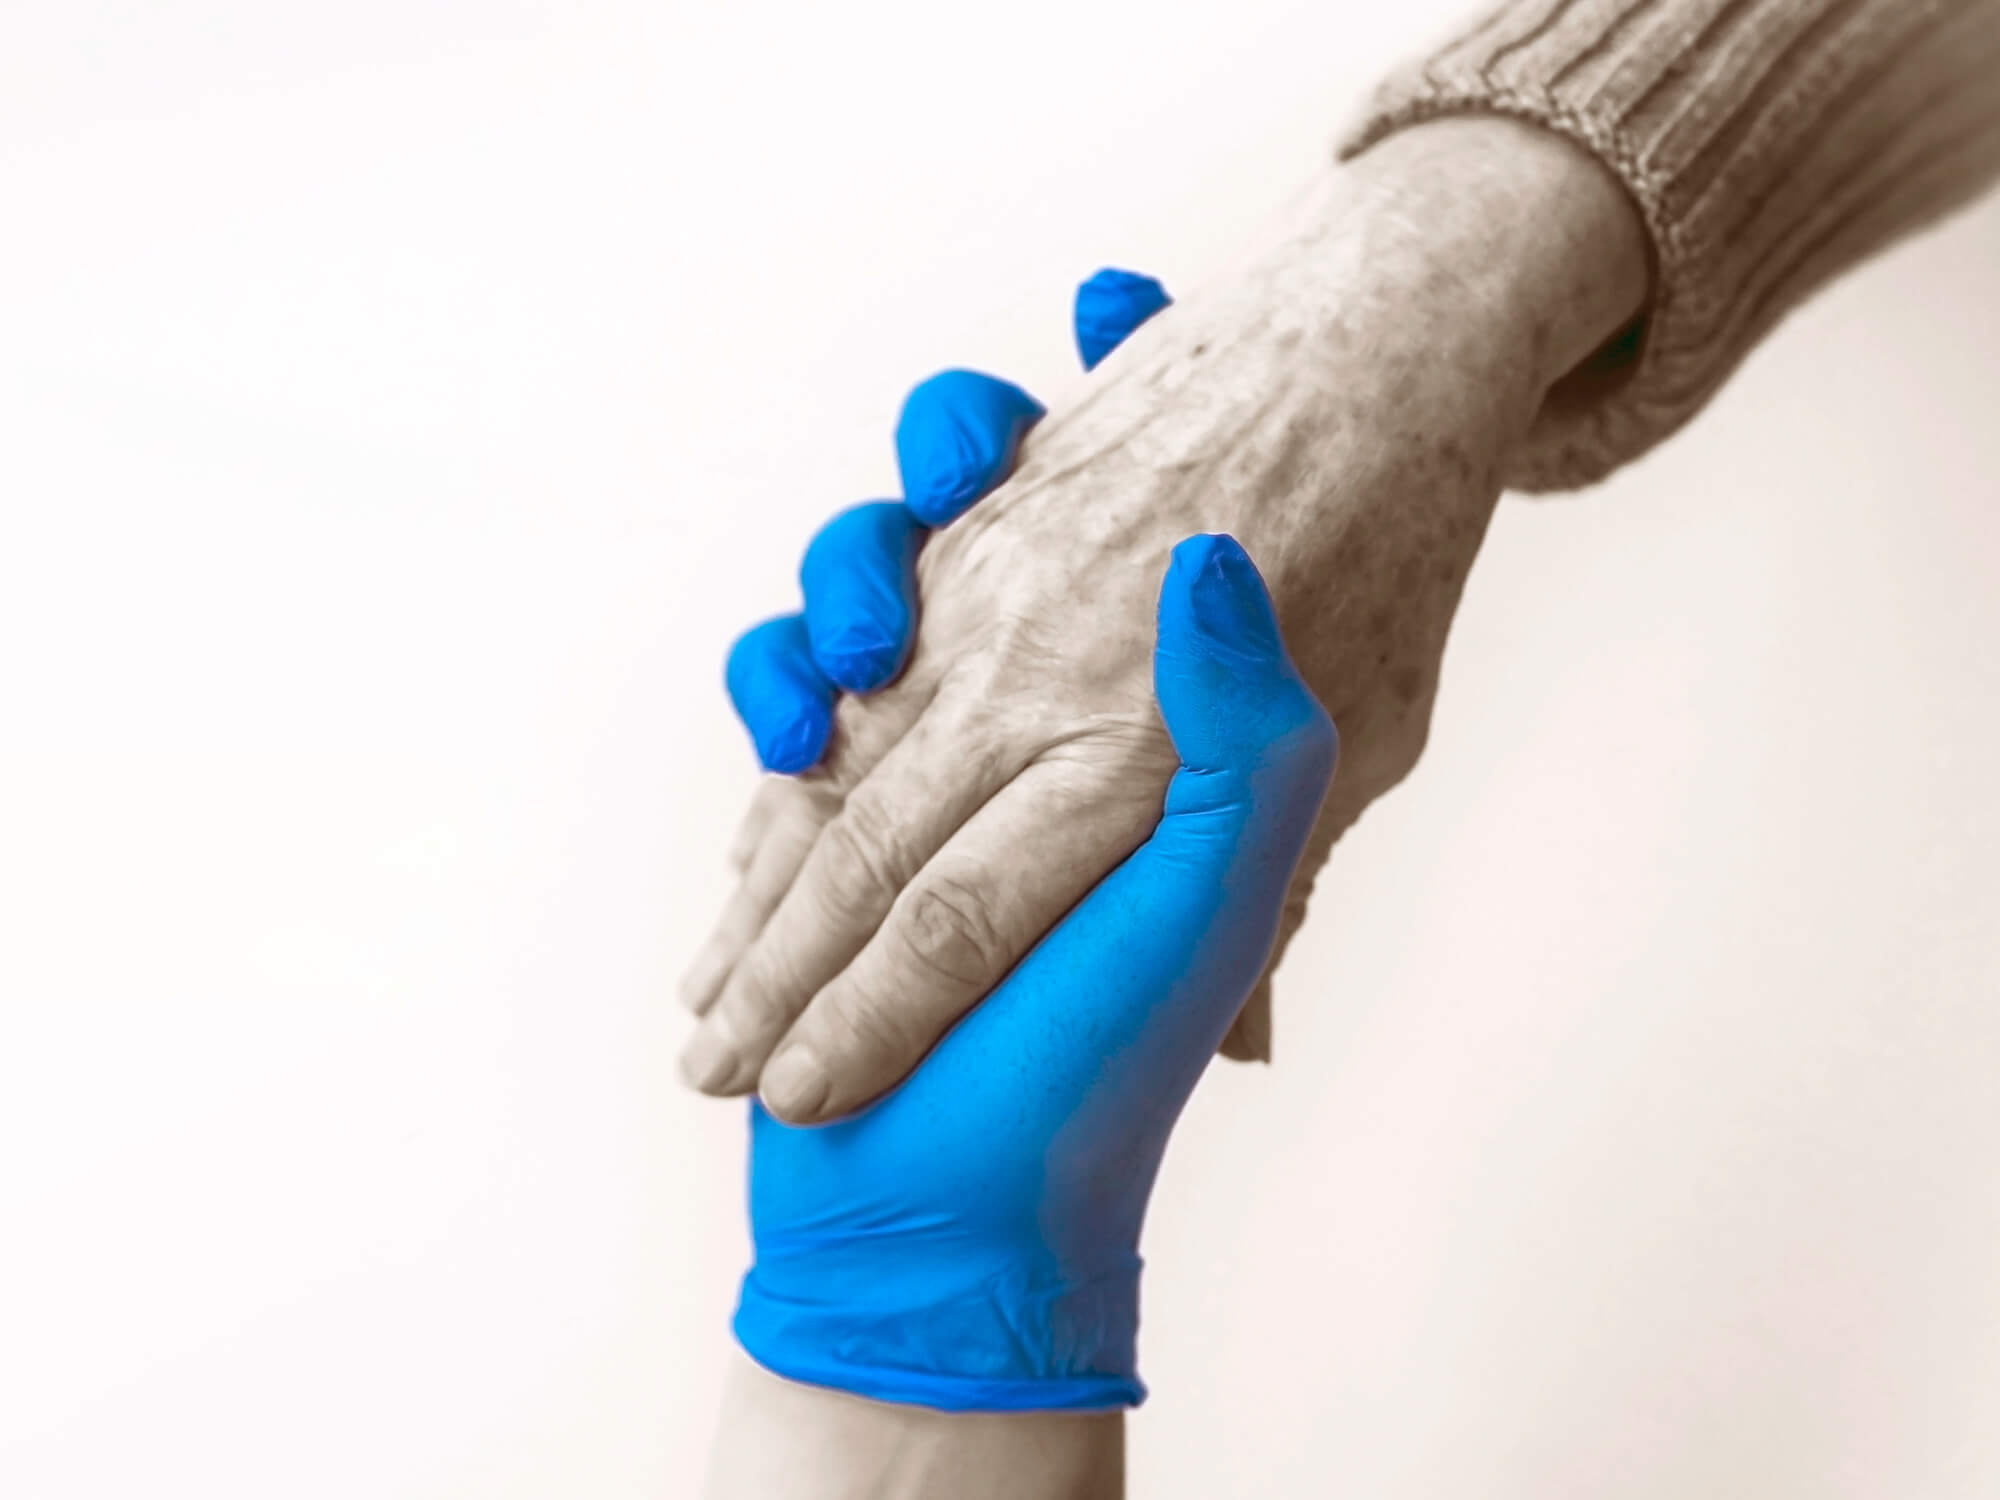 Latex gloved hand holding the hand of an elderly individual.